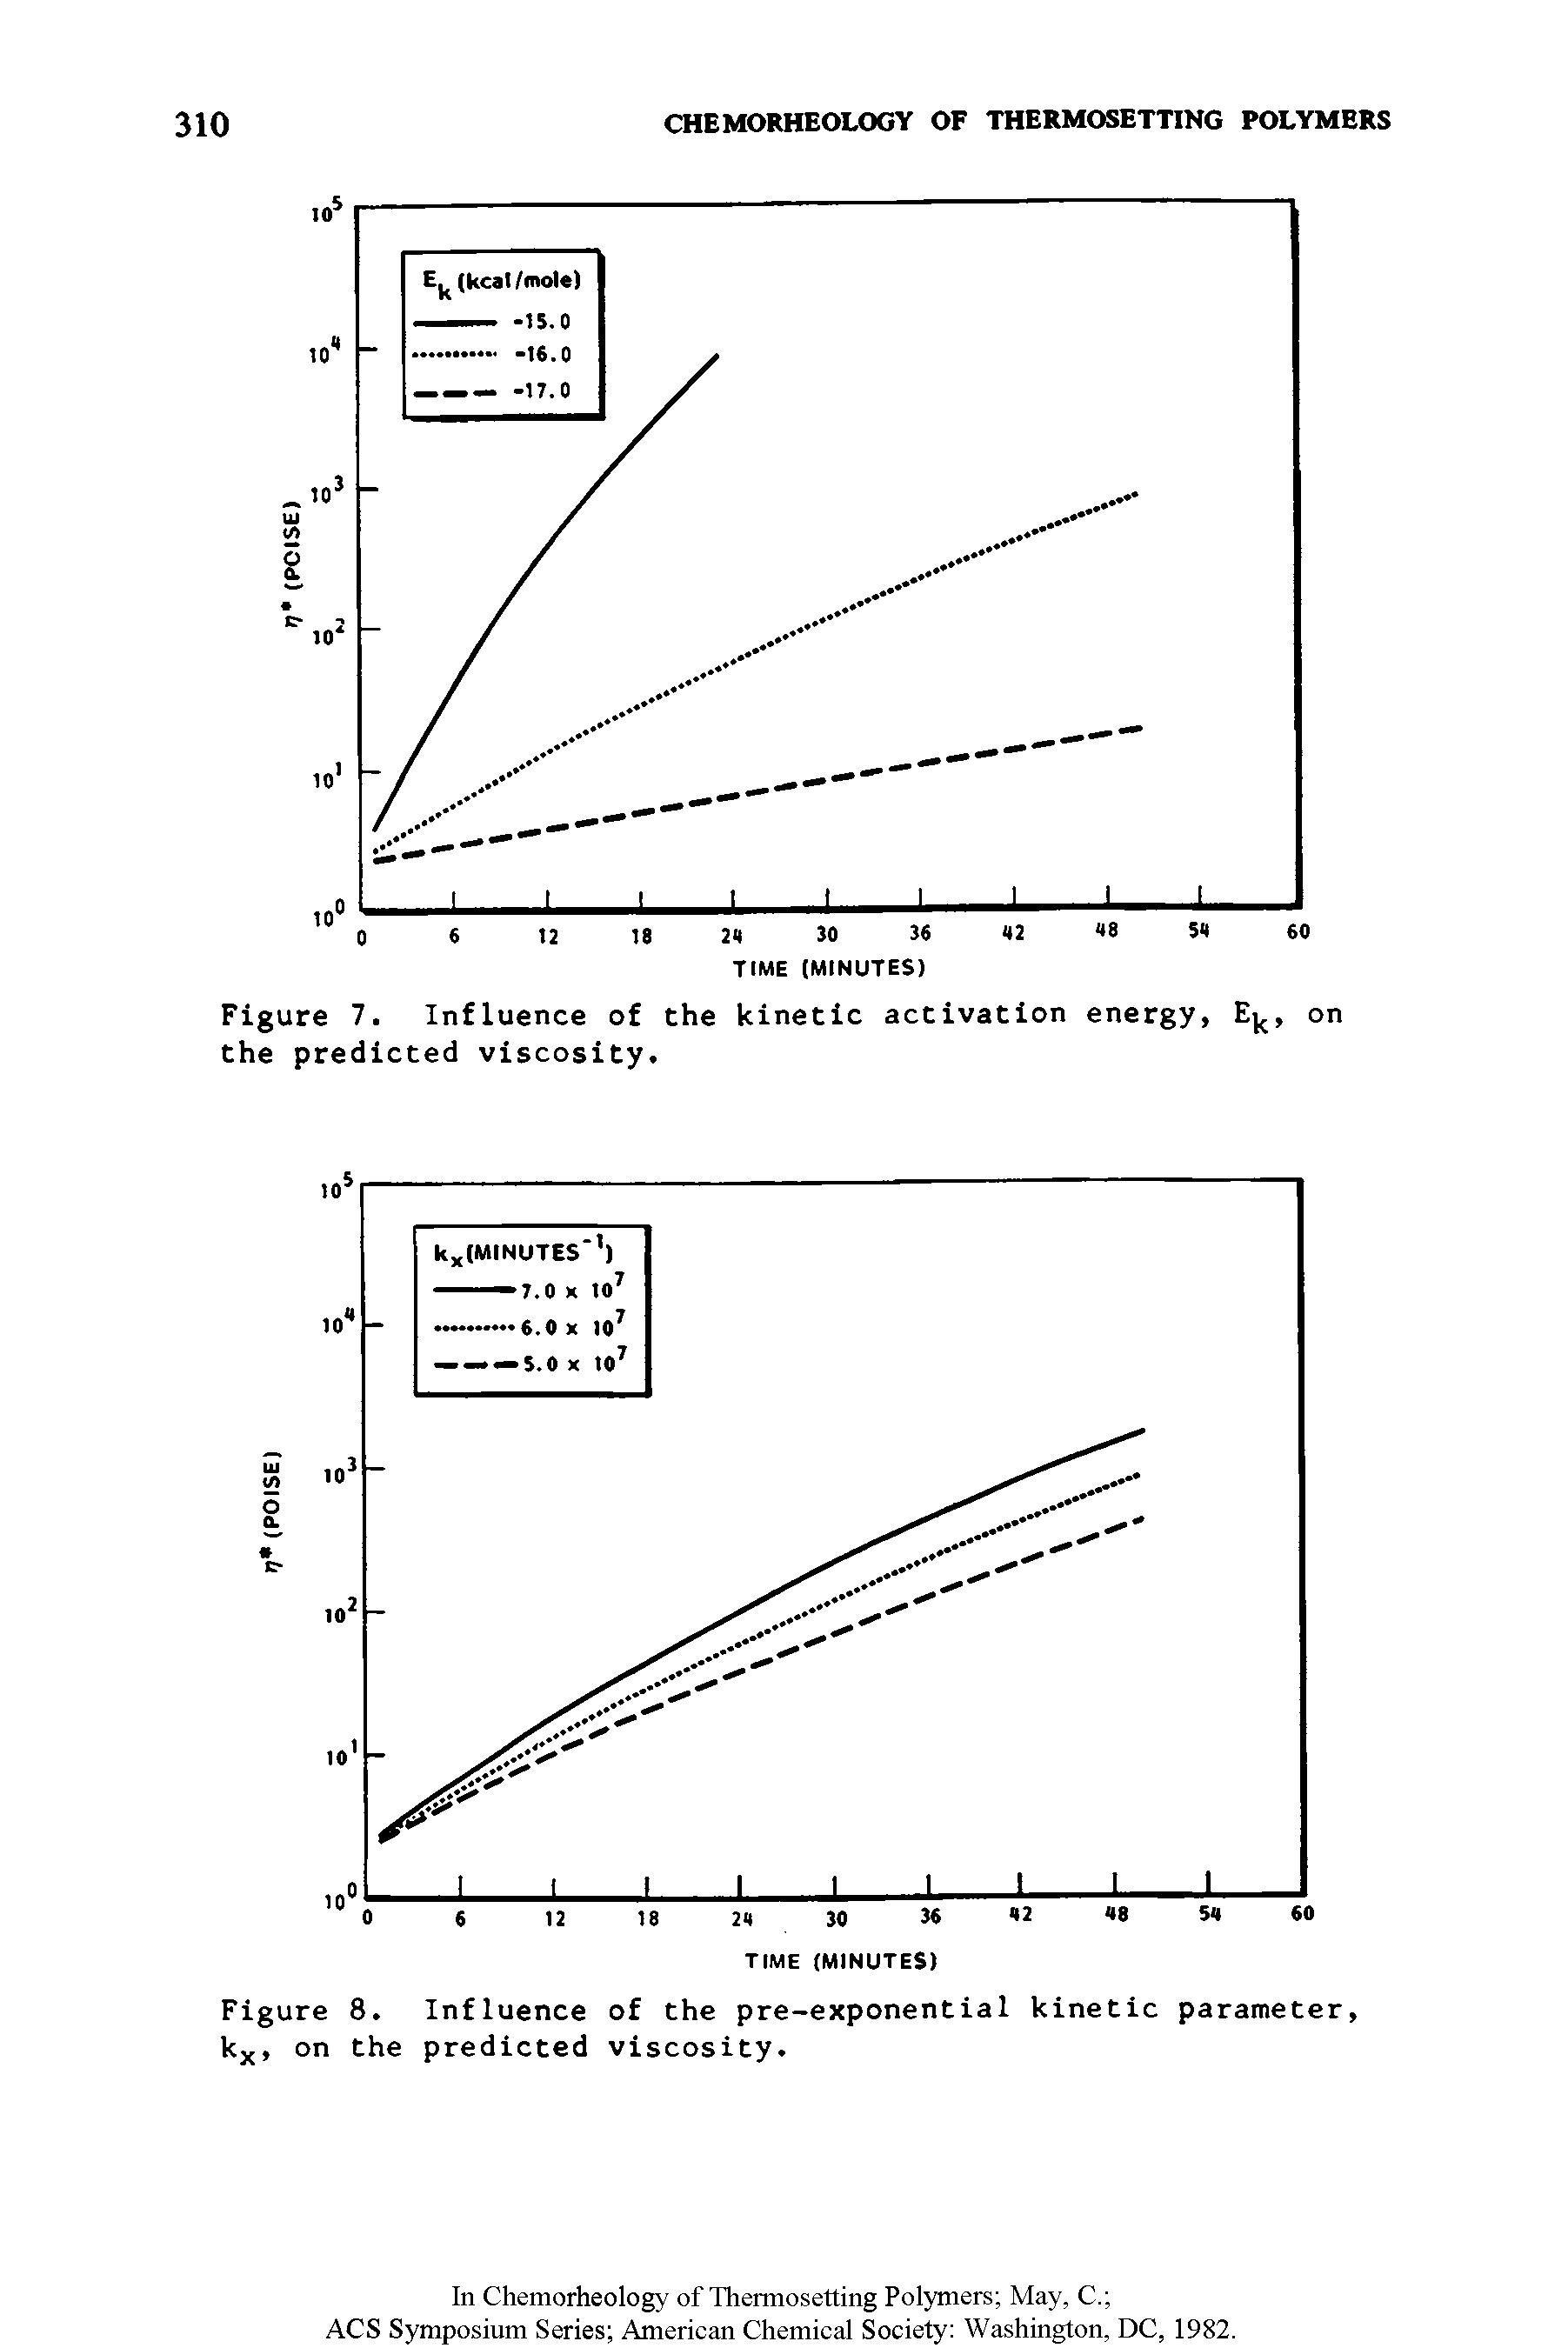 Figure 7. Influence of the kinetic activation energy, Ej, on the predicted viscosity.